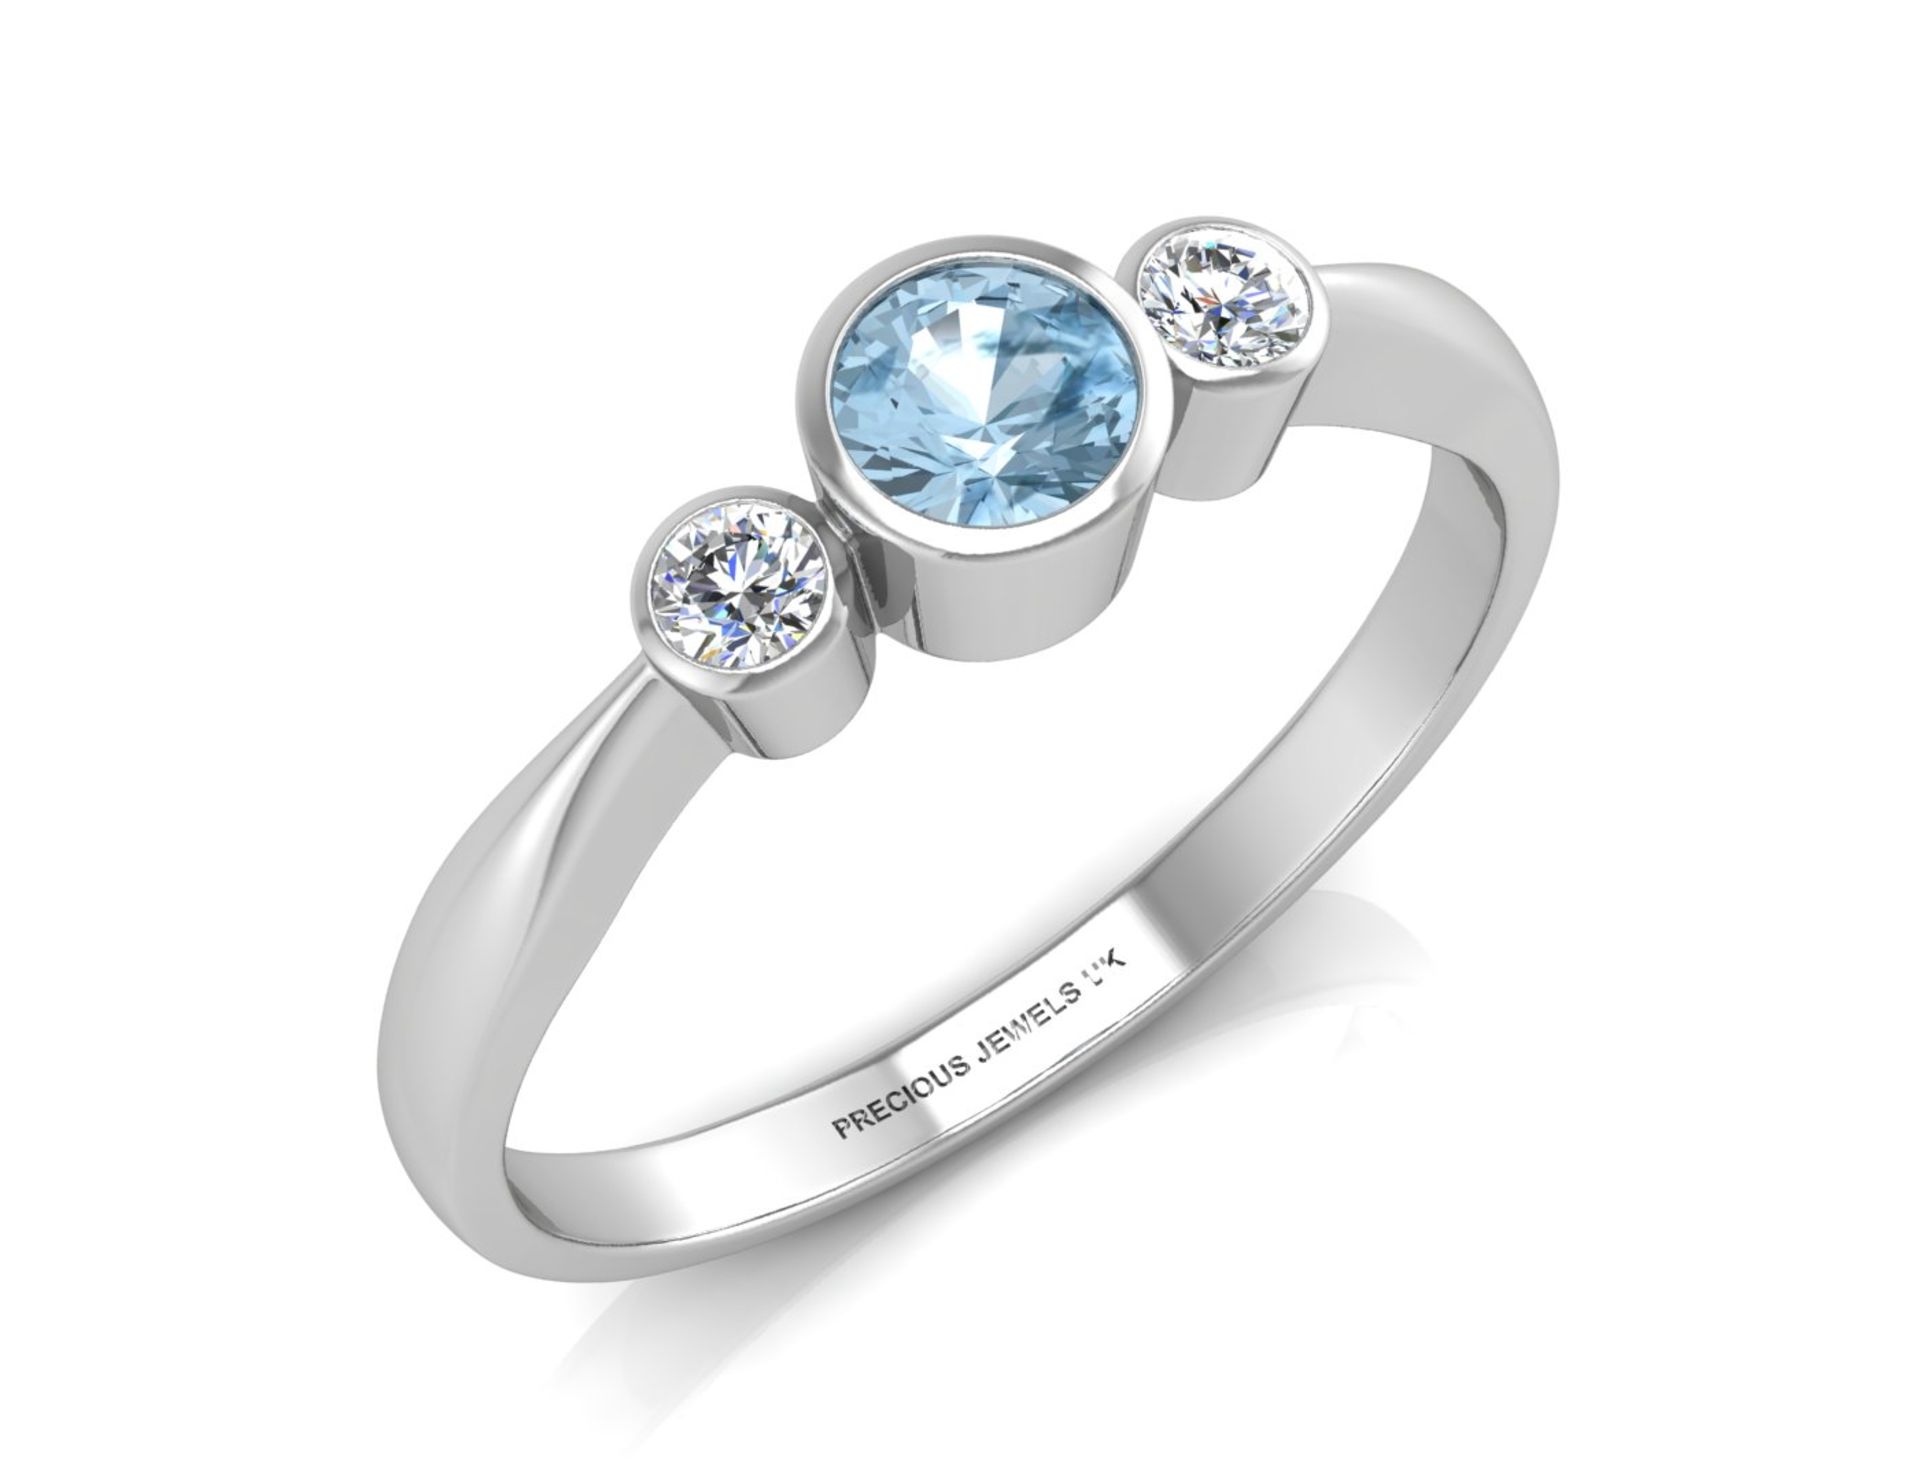 9ct White Gold Three Stone Diamond And Blue Topaz Ring 0.10 Carats - Valued by AGI £990.00 - One